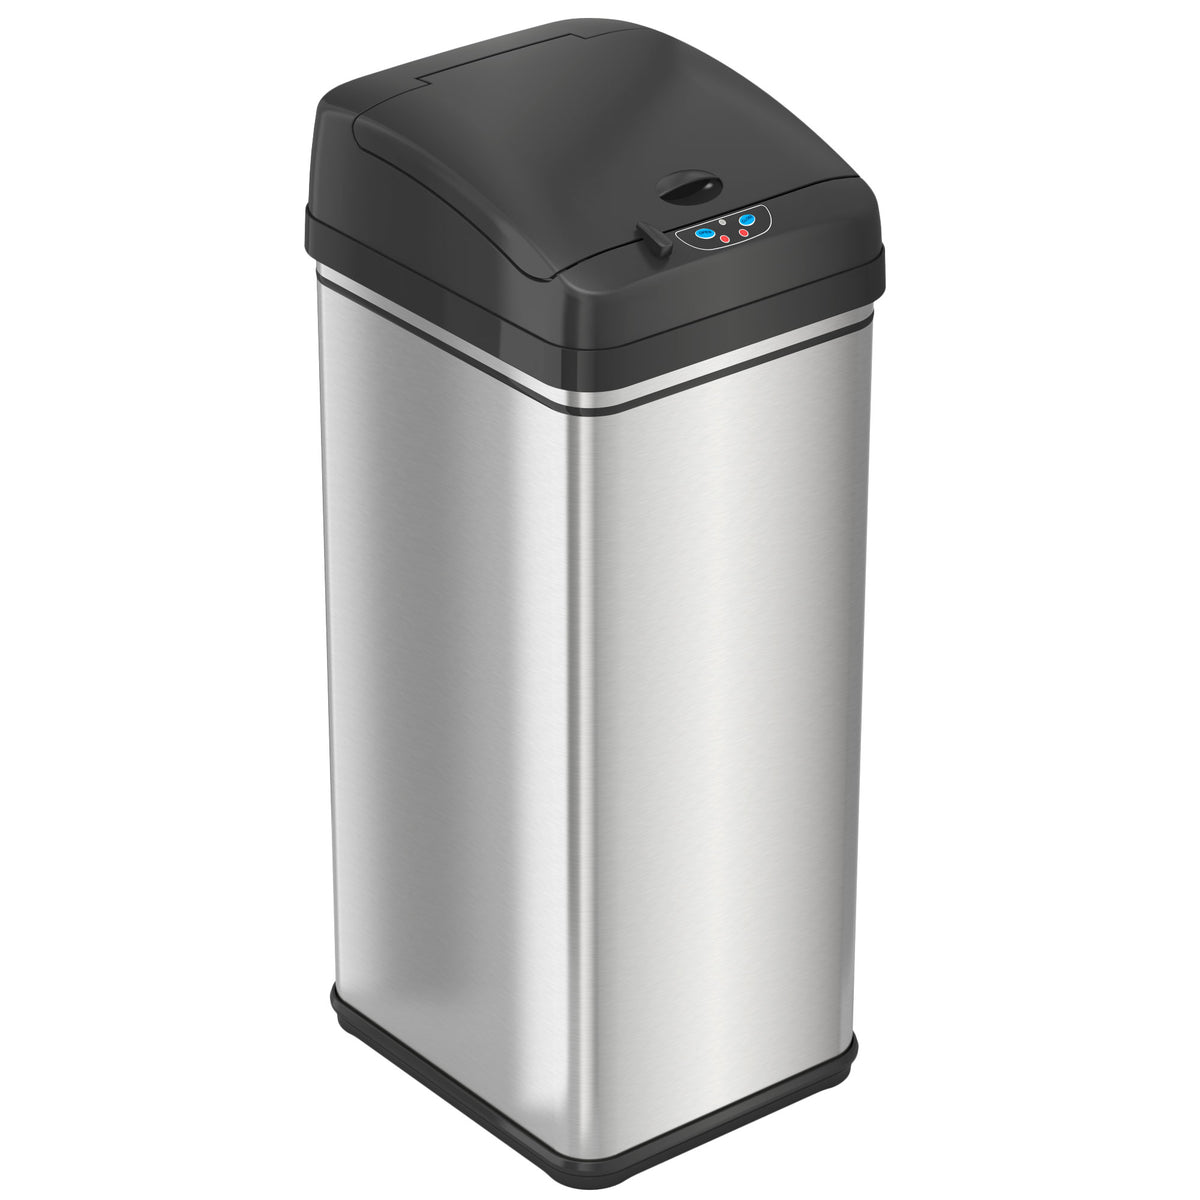 iTouchless DZT13P Touchless Sensor Trash Can with Odor Filter